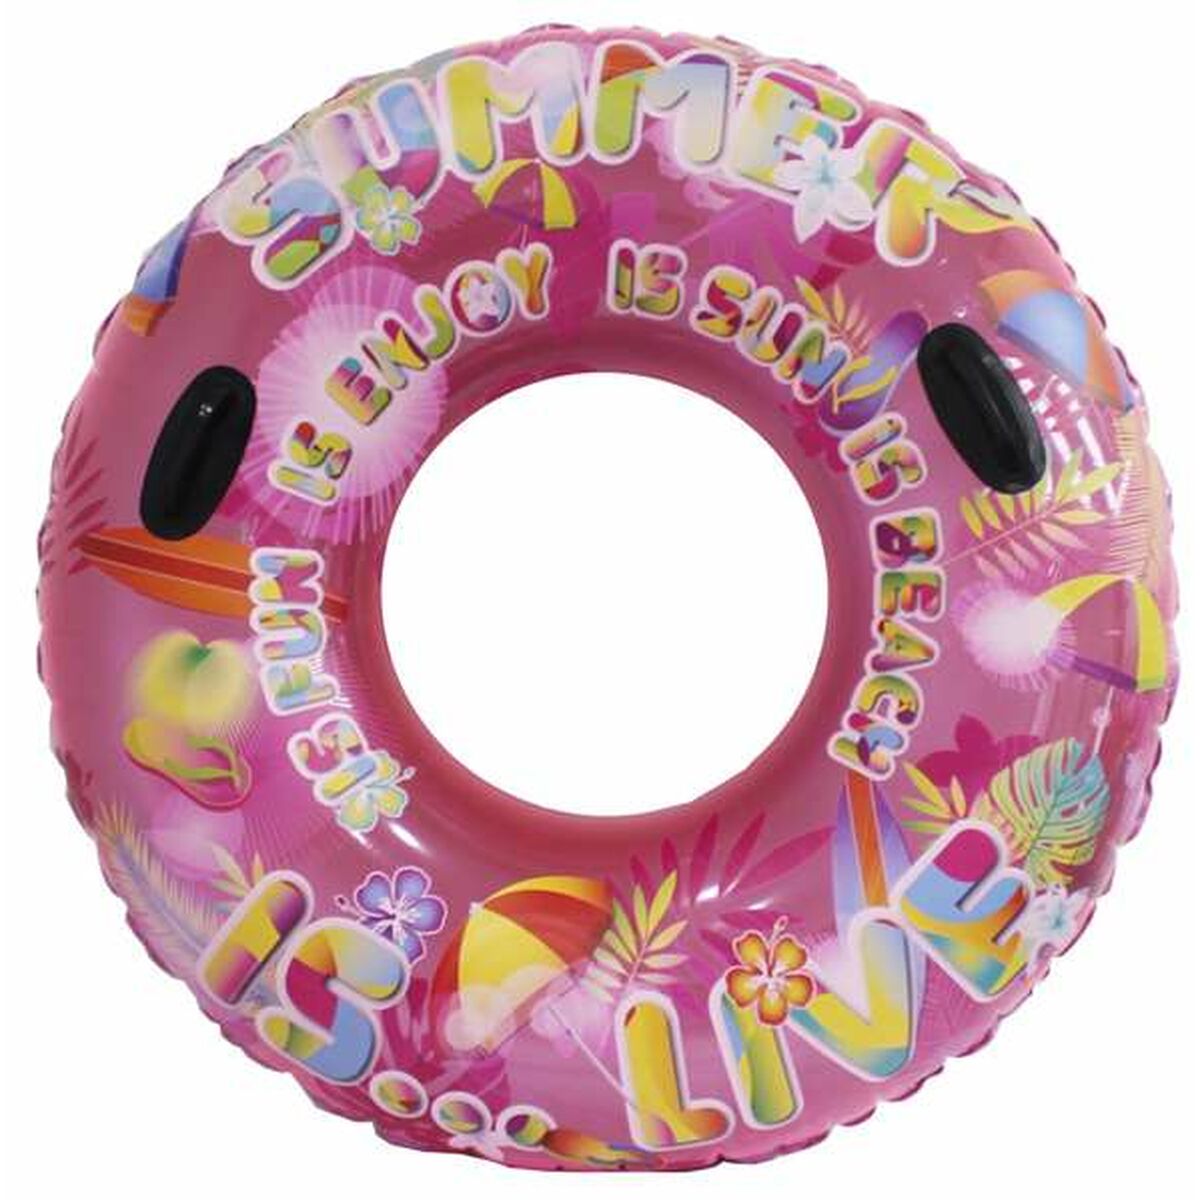 Inflatable Floating Doughnut The summer is fun